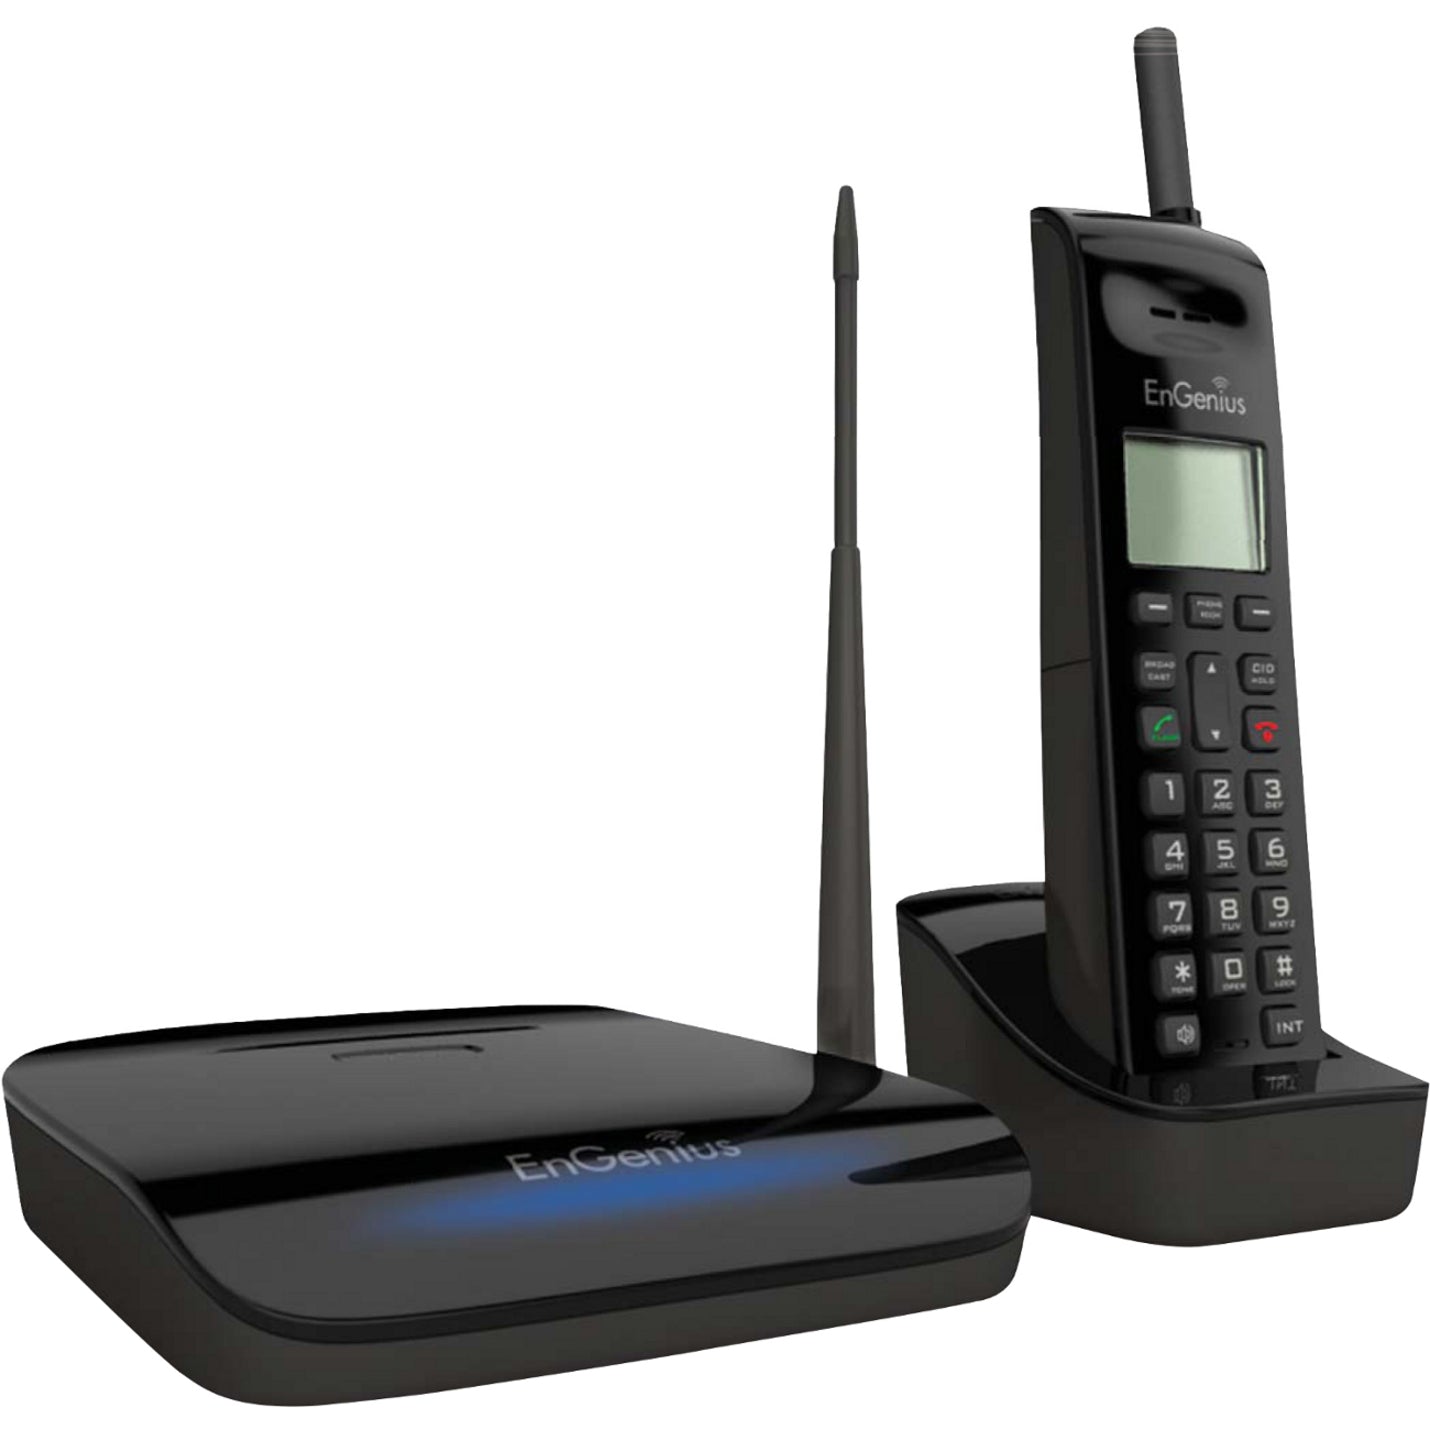 EnGenius FREESTYL 2 Extreme Range Scalable Cordless Phone System, LCD Screen, Headset Port, 1 Year Limited Warranty